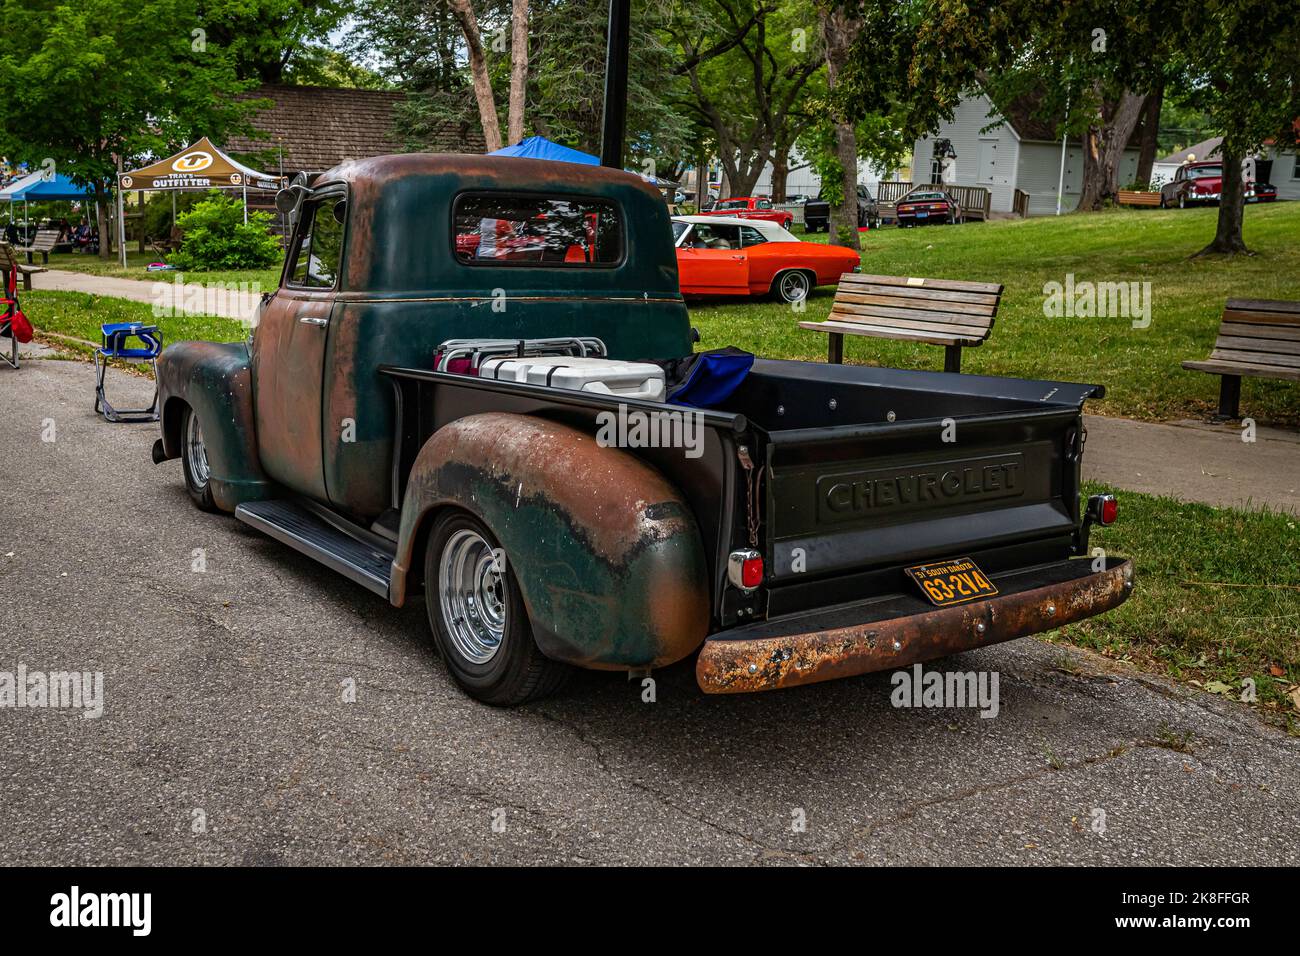 Des Moines, IA - July 01, 2022: High perspective rear corner view of an old 1951 Chevrolet Advance Design 3100 Pickup Truck at a local car show. Stock Photo